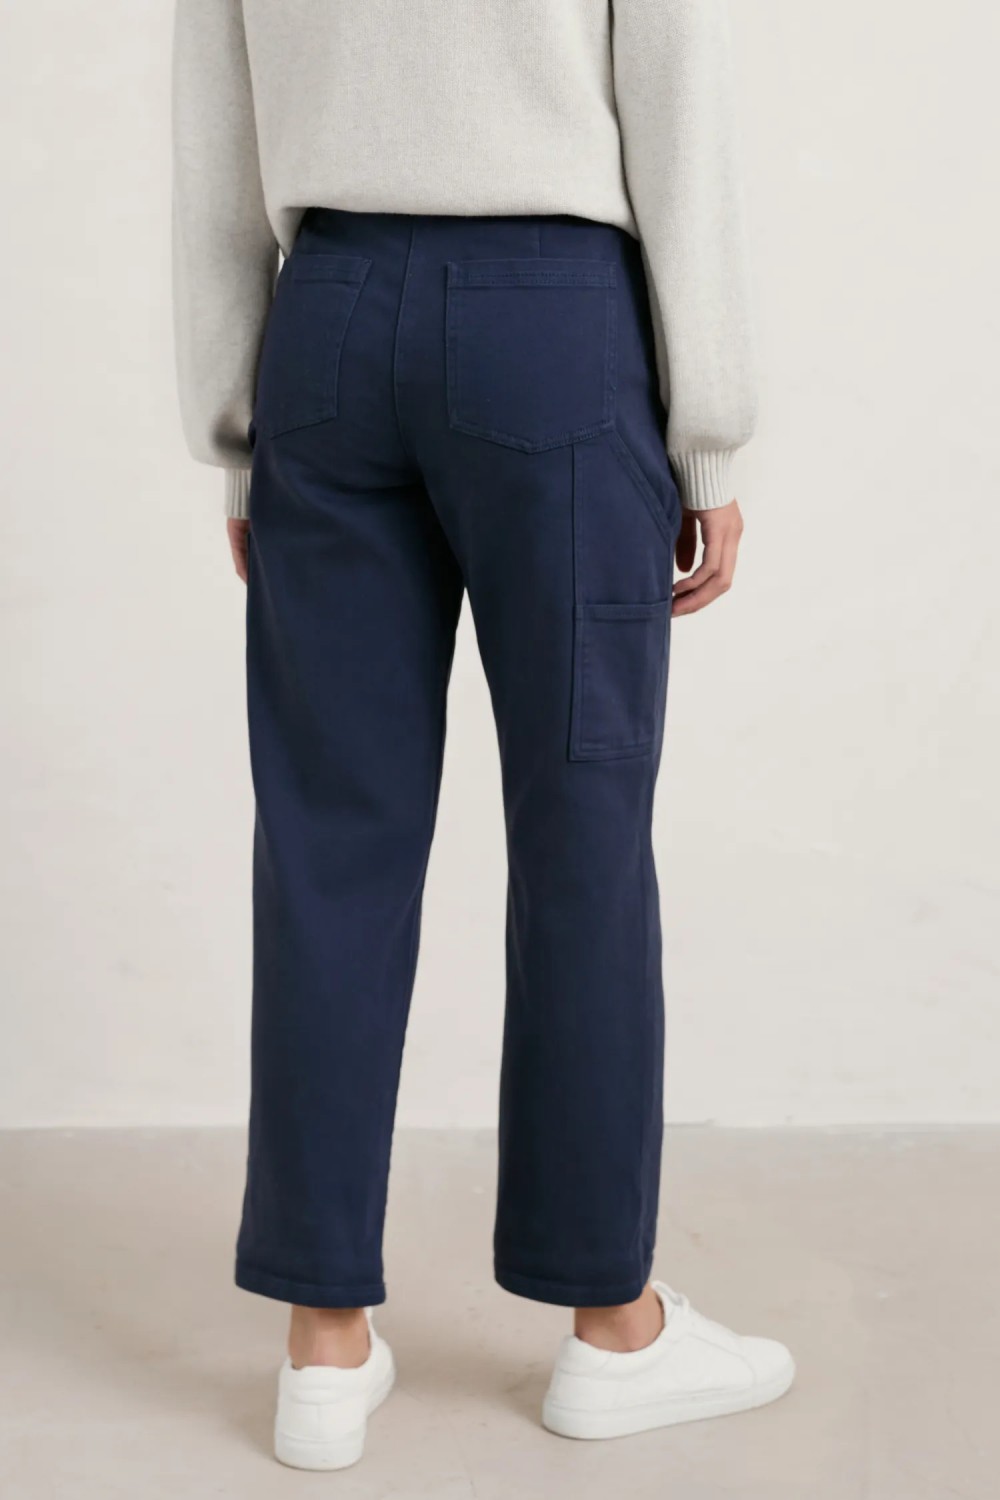 Seasalt Clothing Cliff Picnic Trousers Maritime